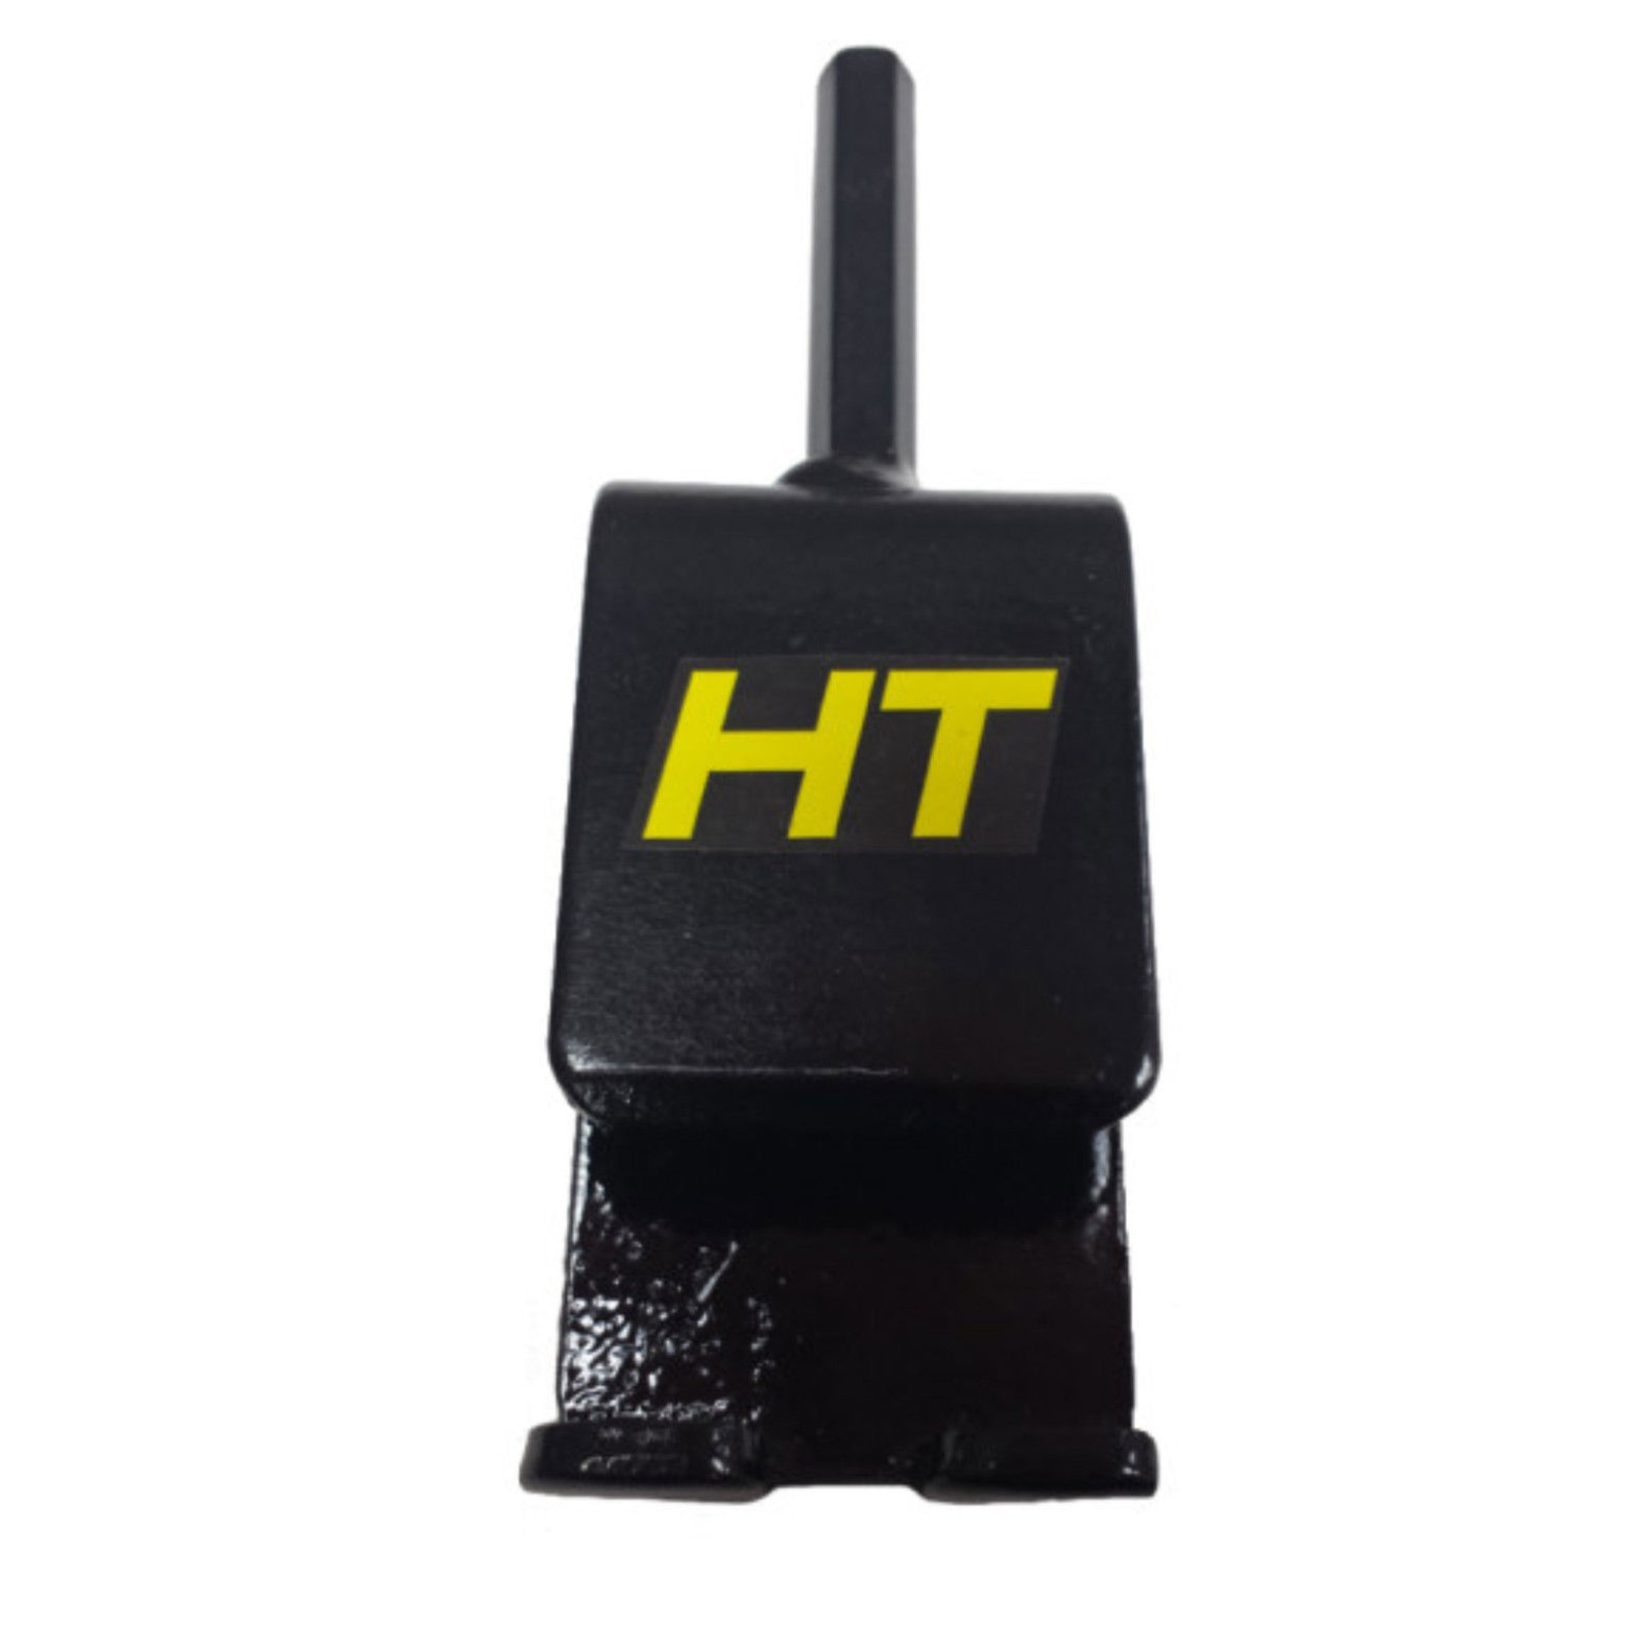 HT ENTERPRISES HT ANCHOR ICE TOOL POWER DRIVE WORKS ON ALL STYLES OF ICE ANCHORS 4cp